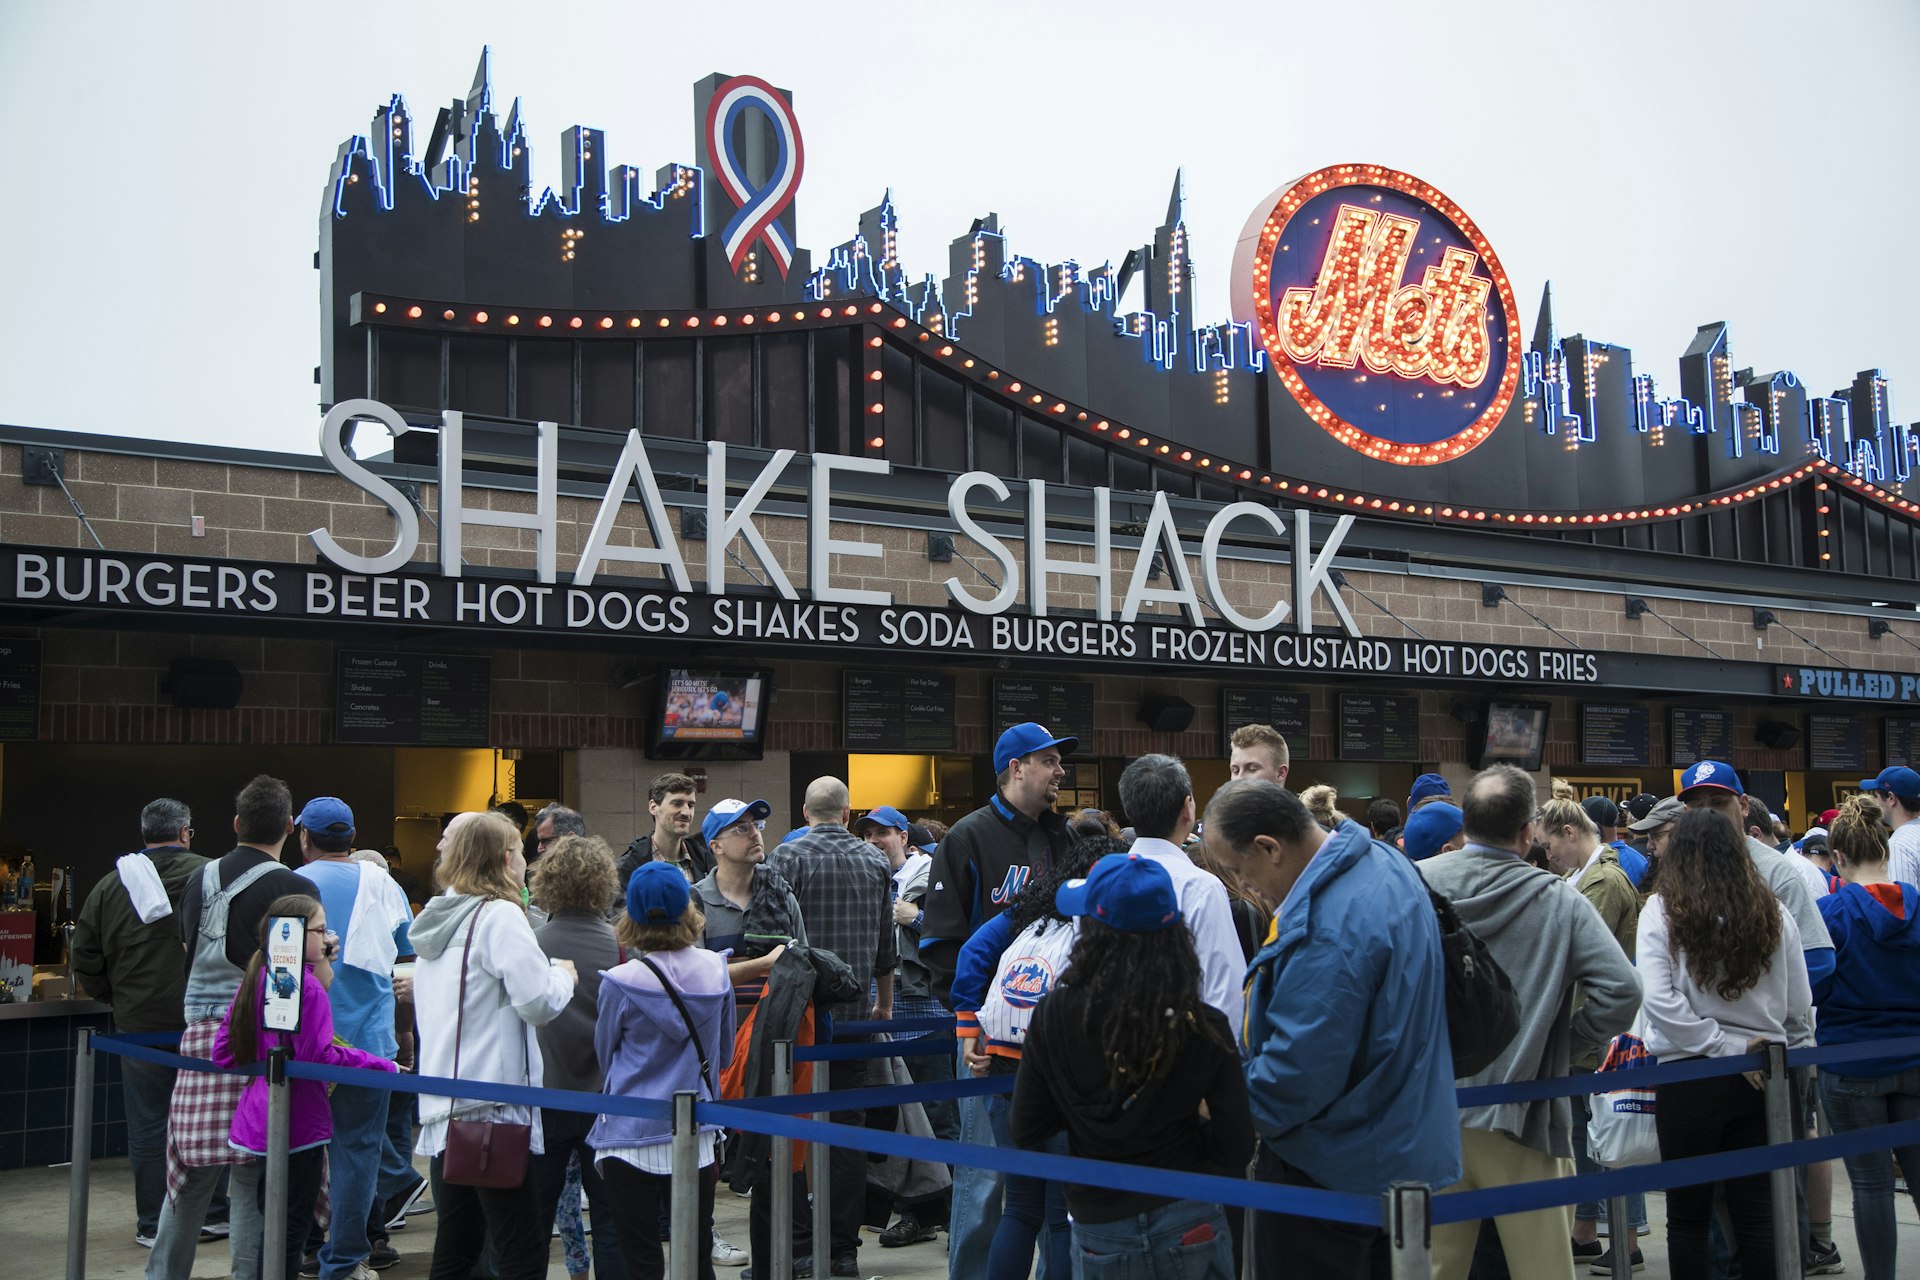 View of fans on line at Shake Shack food concession stand before New York Mets vs Washington Nationals game at Citi Field, Flushing, Queens, New York City, New York, USA